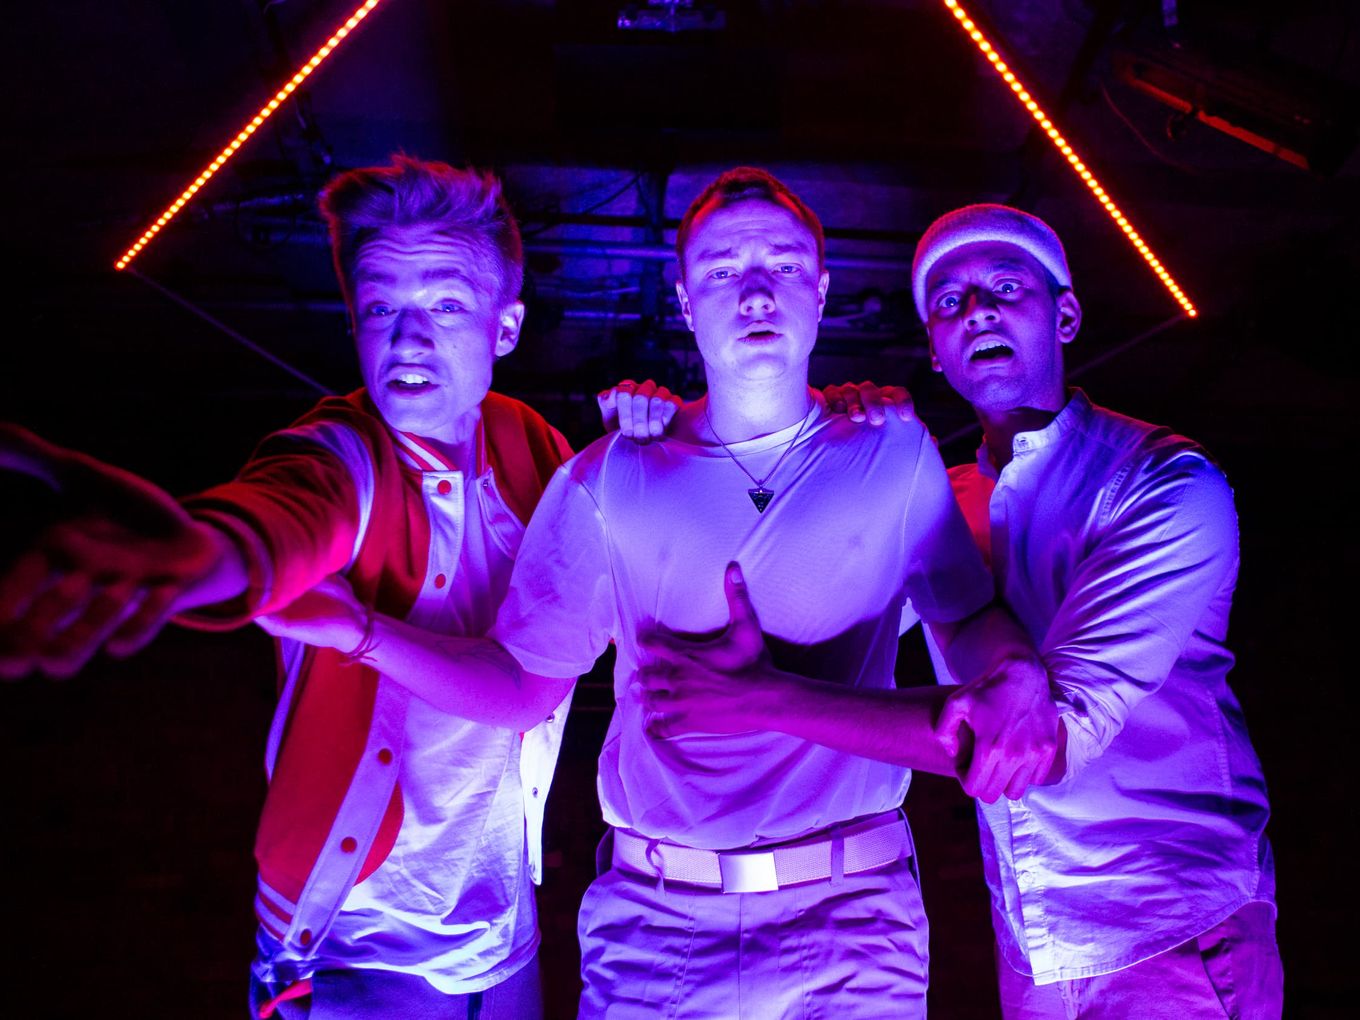 In garish neon light, three men approach the camera with wild looks on their faces